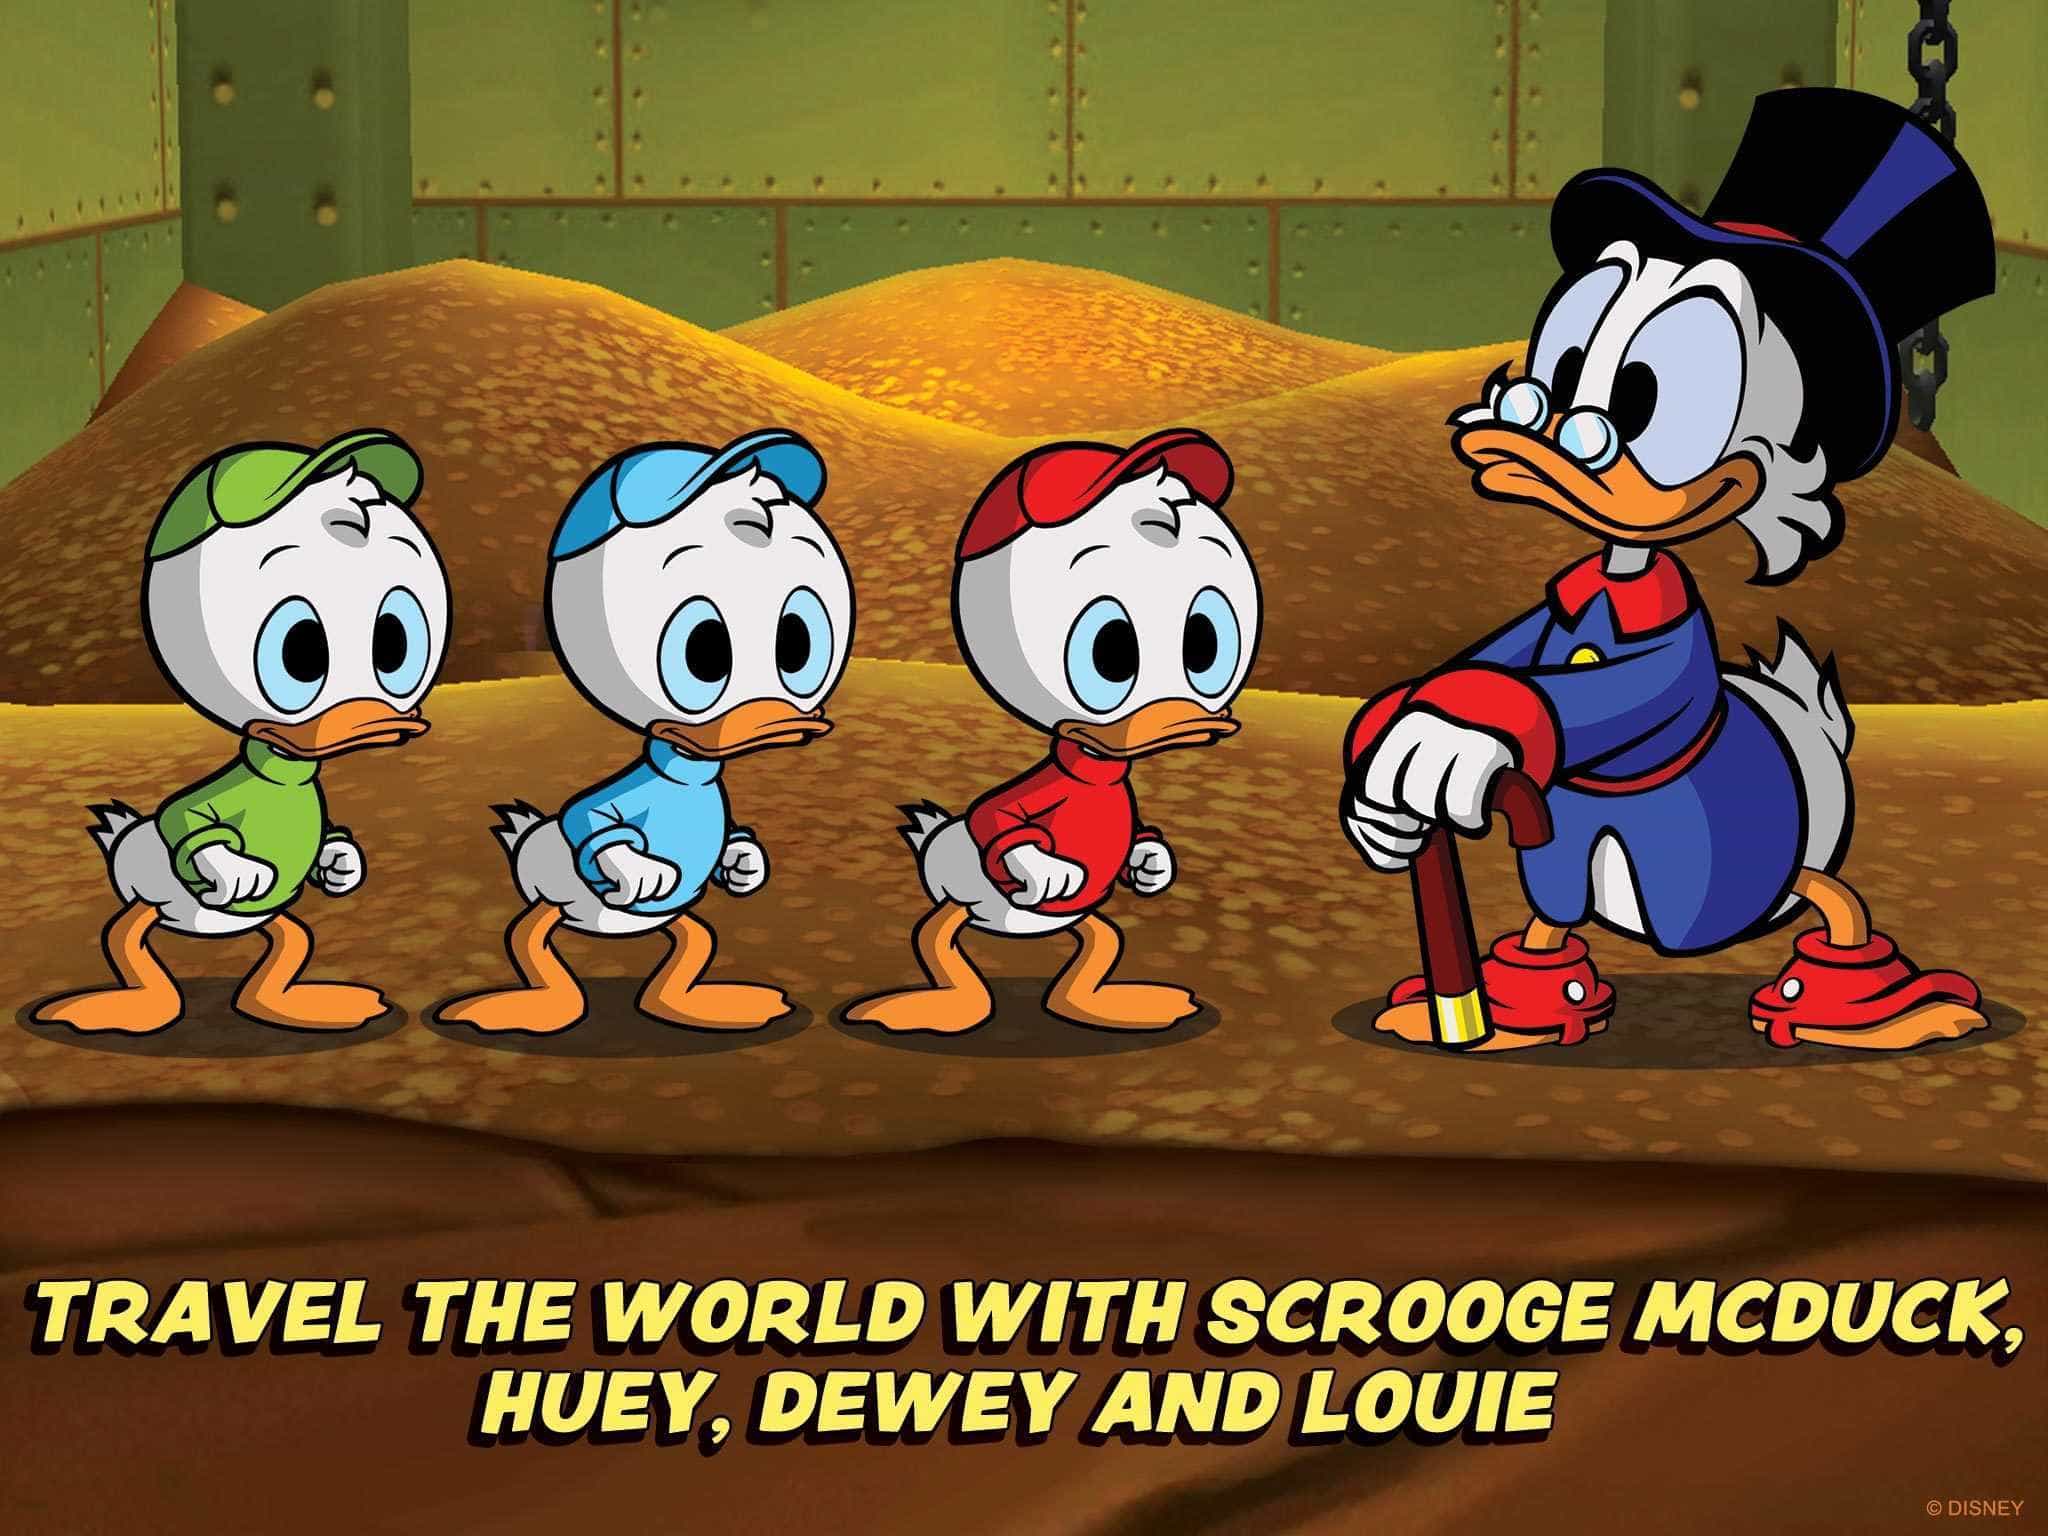 Scrooge Mcduck Returns In Remastered Ducktales For Mobile Devices